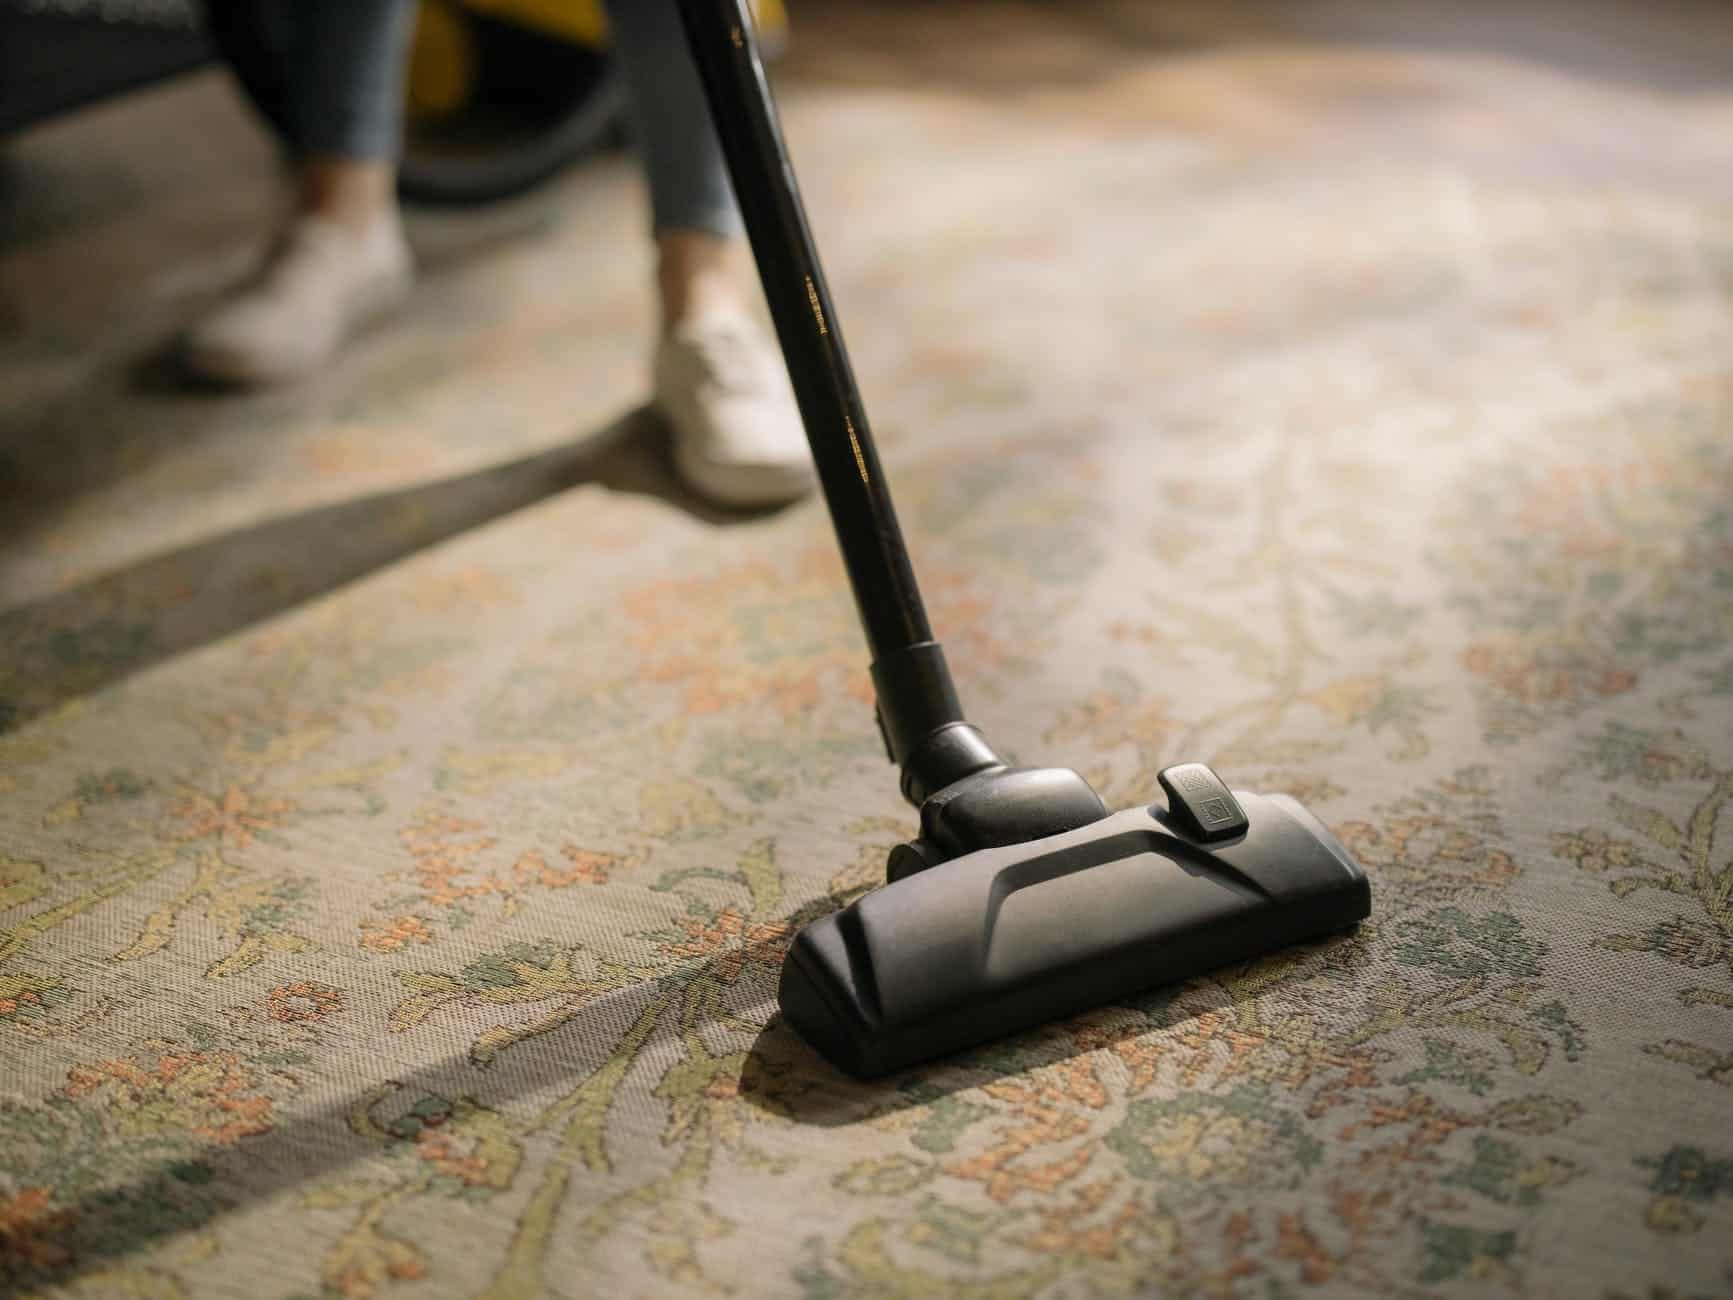 A person uses a vacuum cleaner on a rug.